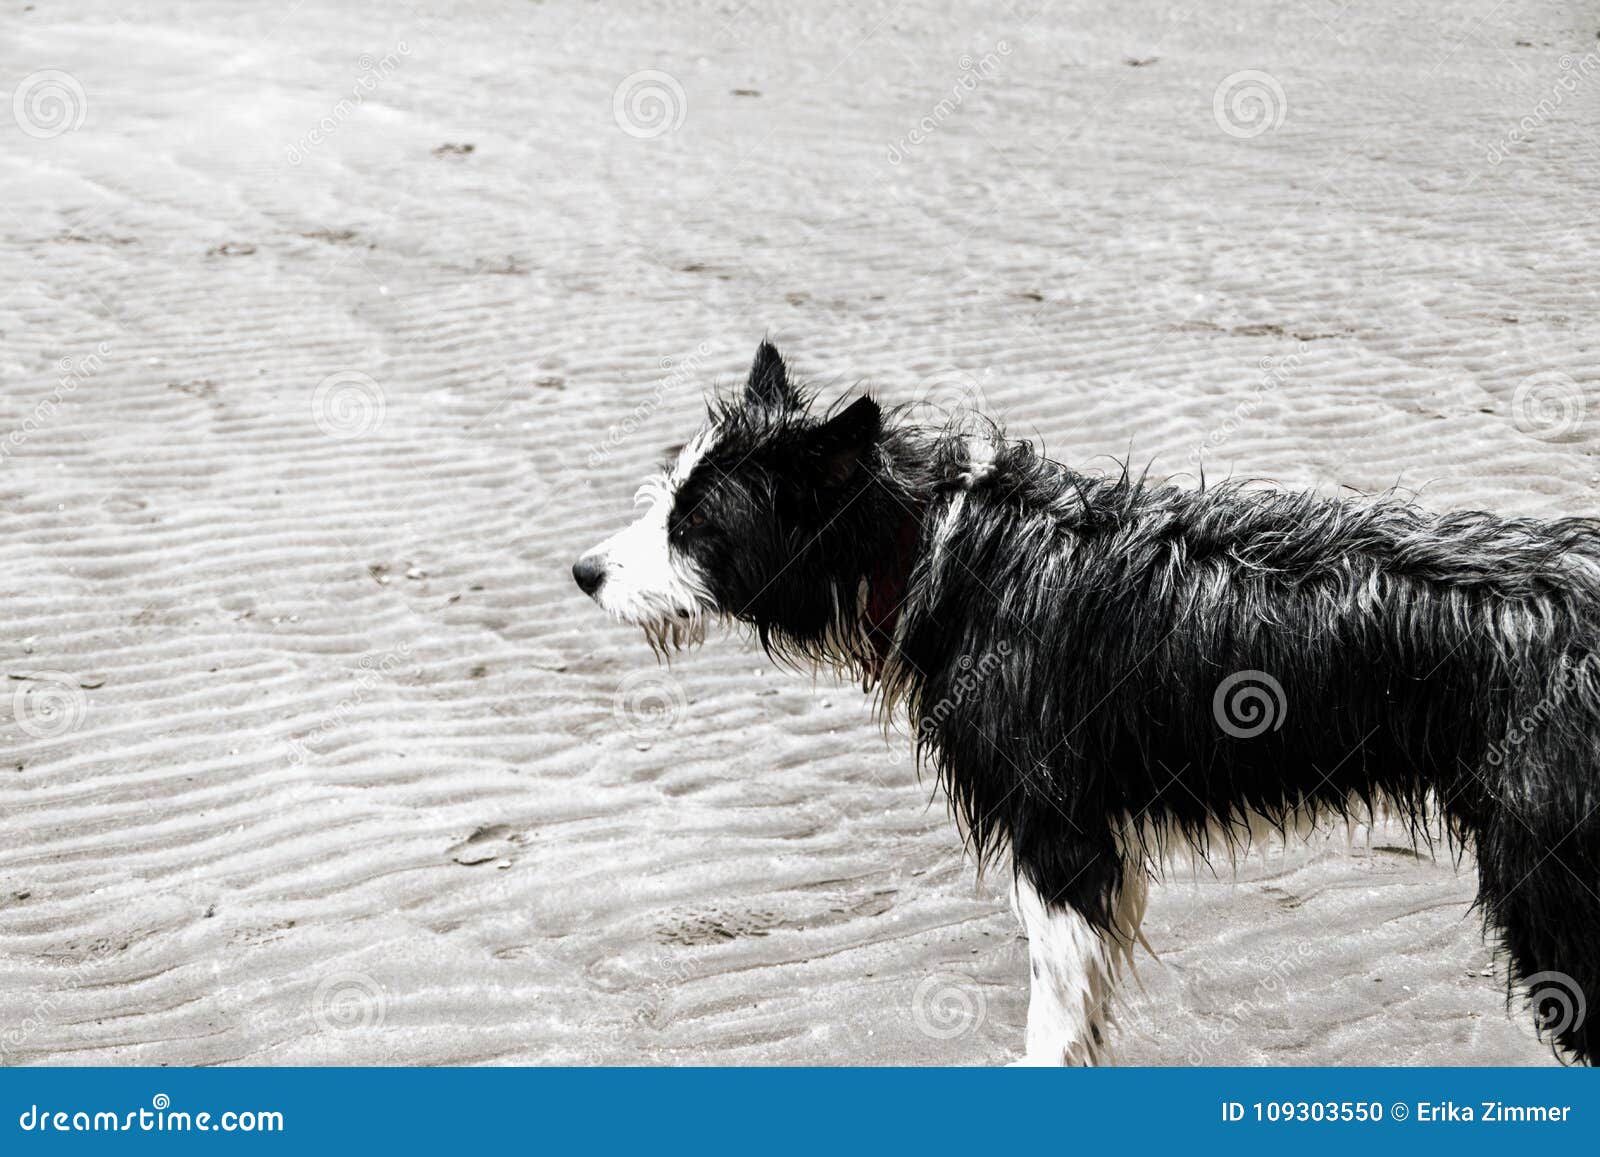 wet dog in puerto piramides beach, sun, waves and sand, beautiful day.